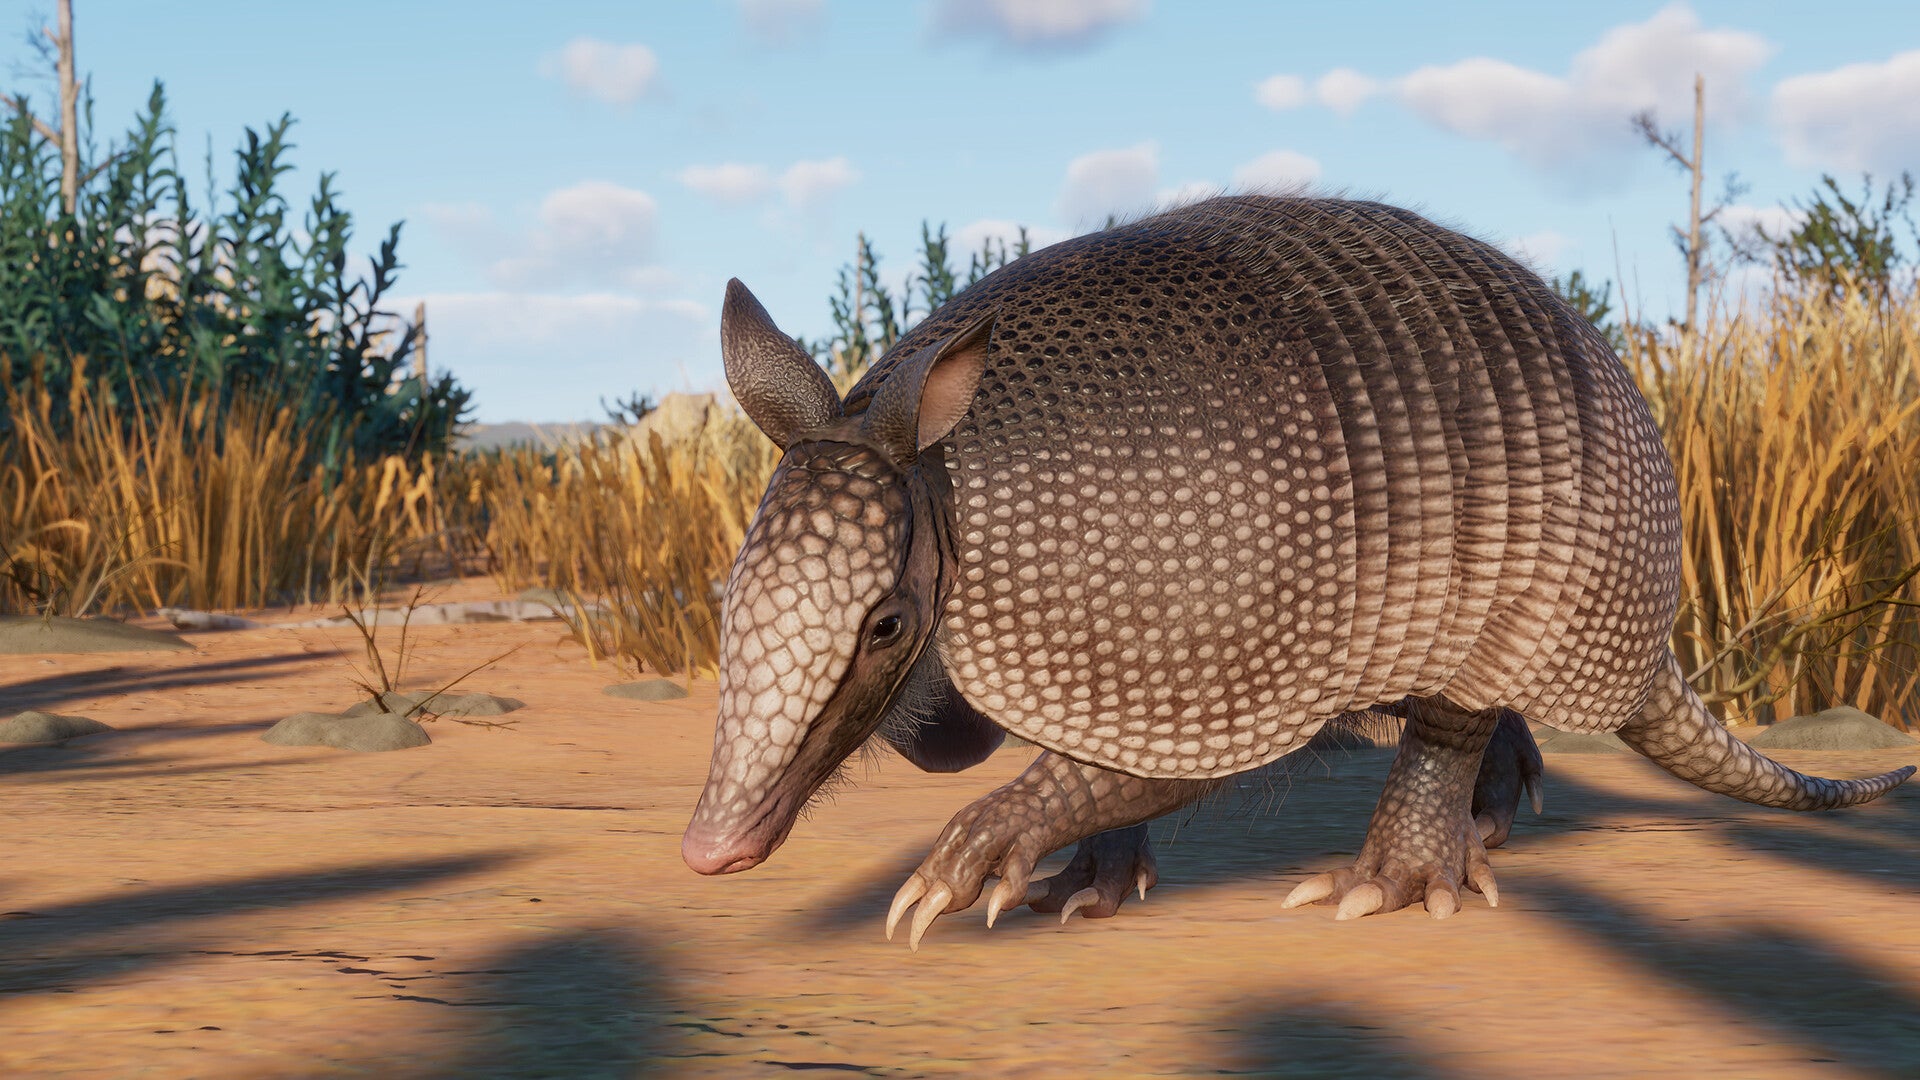 Planet Zoo adds emus, armadillos, and more in new Grasslands expansion |  